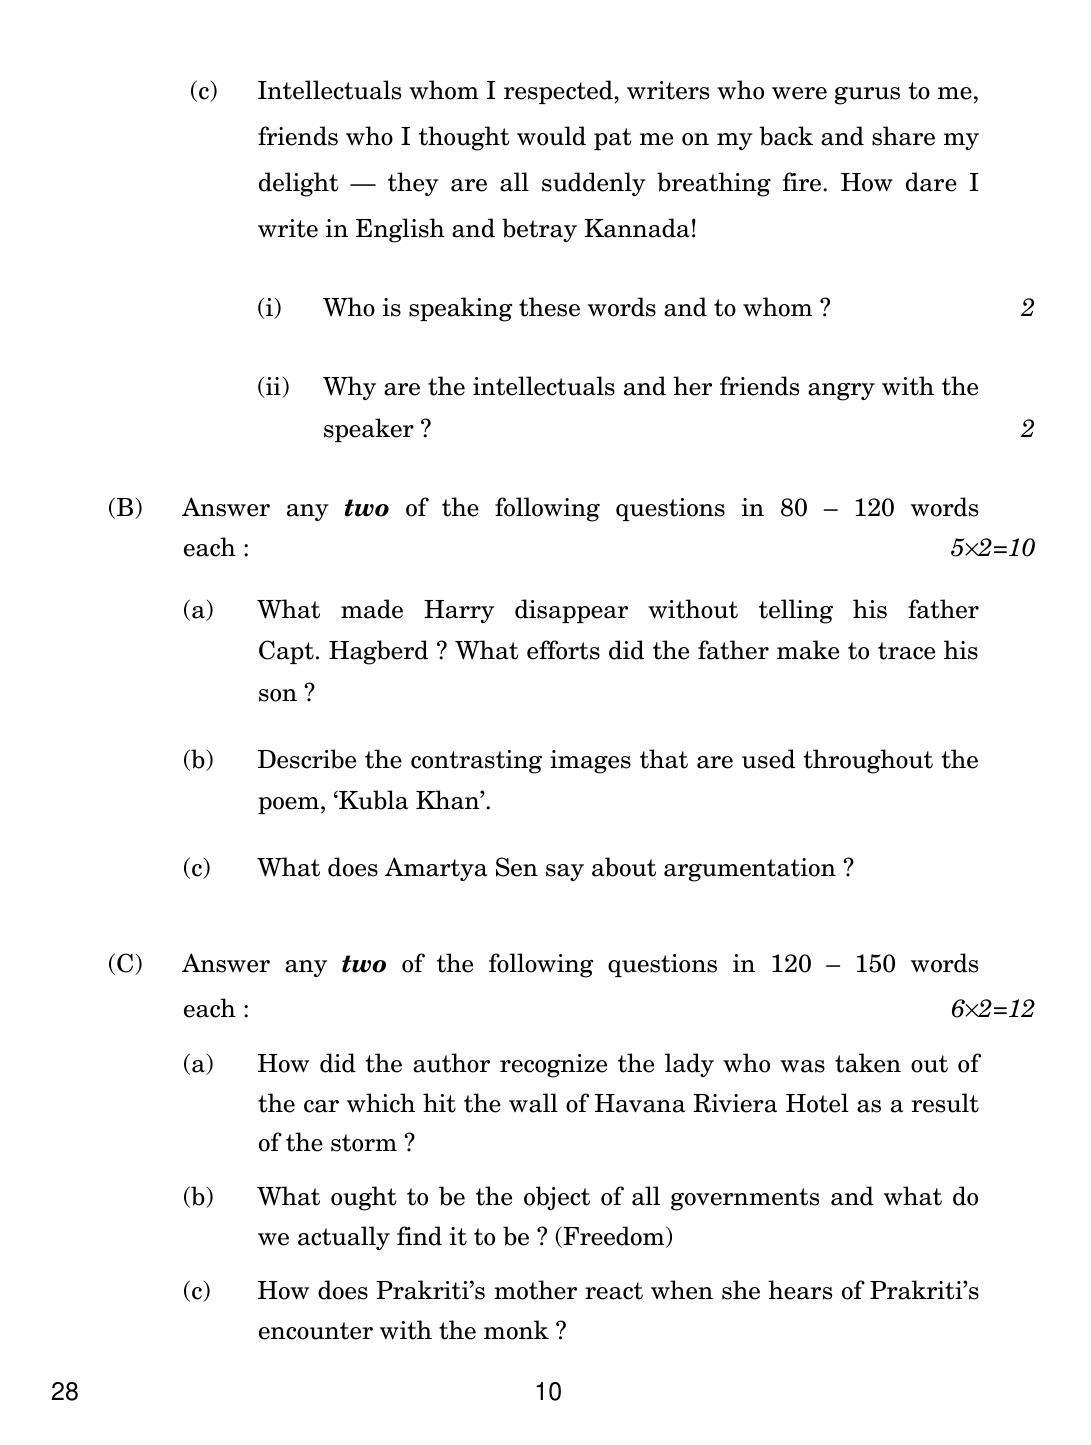 CBSE Class 12 28 ENGLISH ELECTIVE NCERT 2018 Question Paper - Page 10